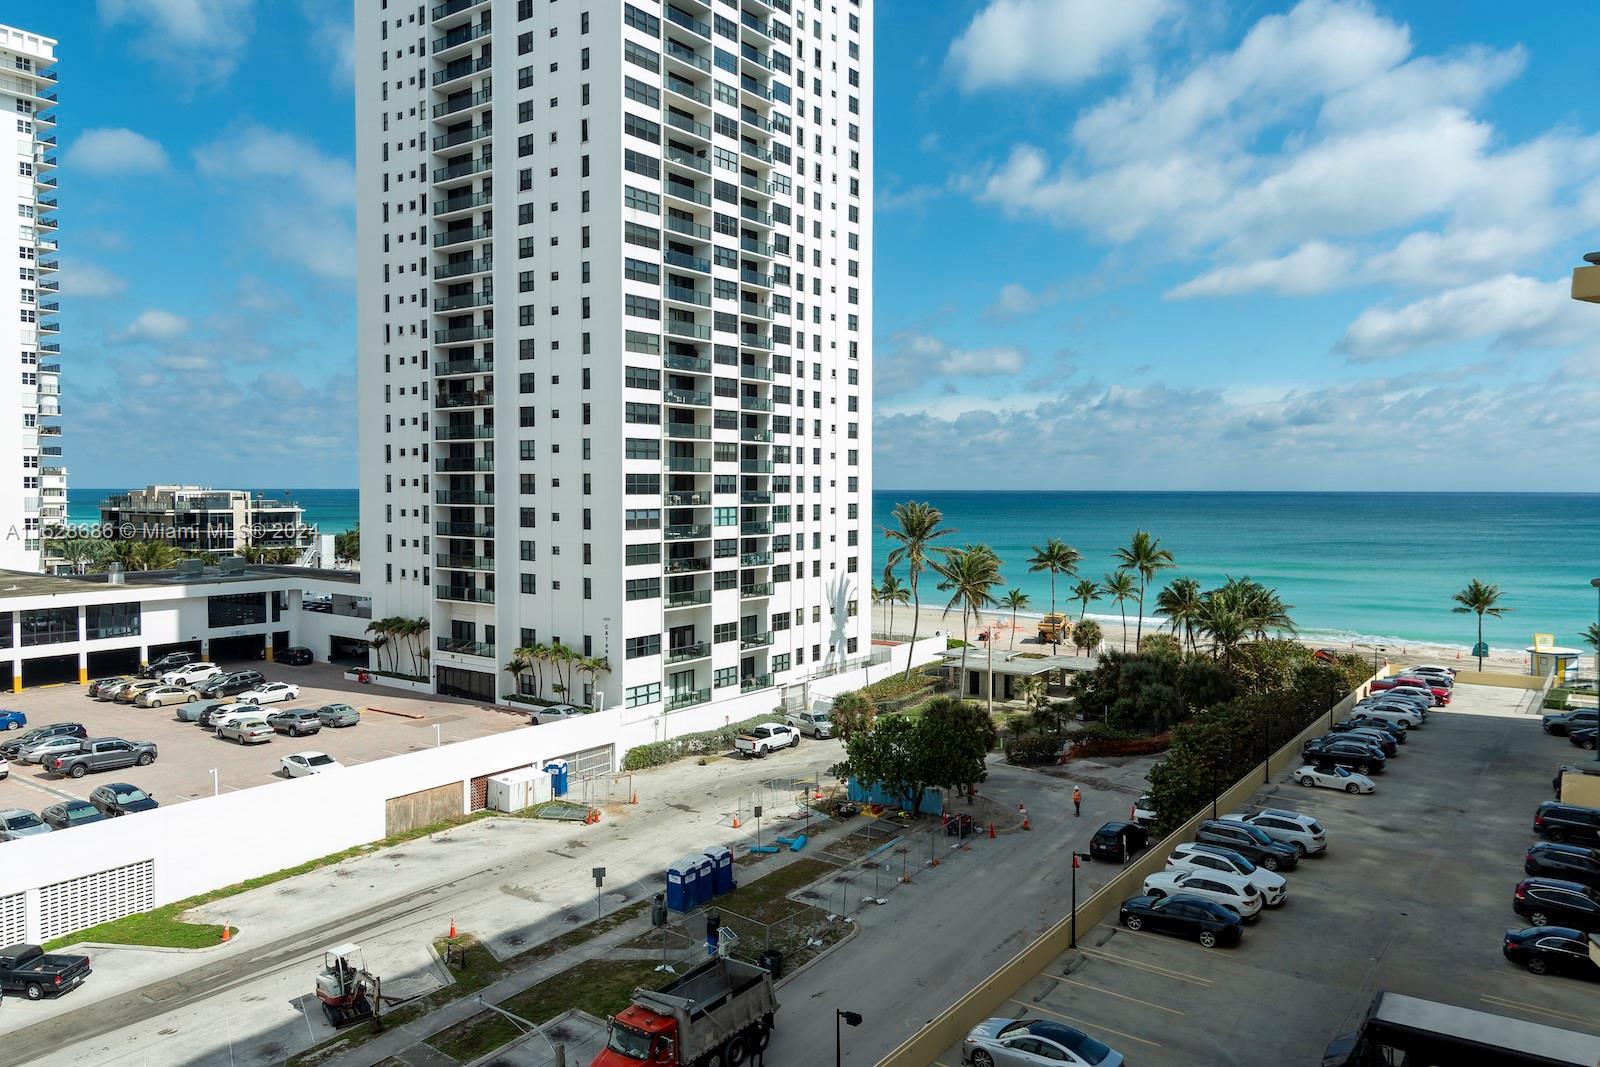 Photo of 2501 S Ocean Dr #736 in Hollywood, FL